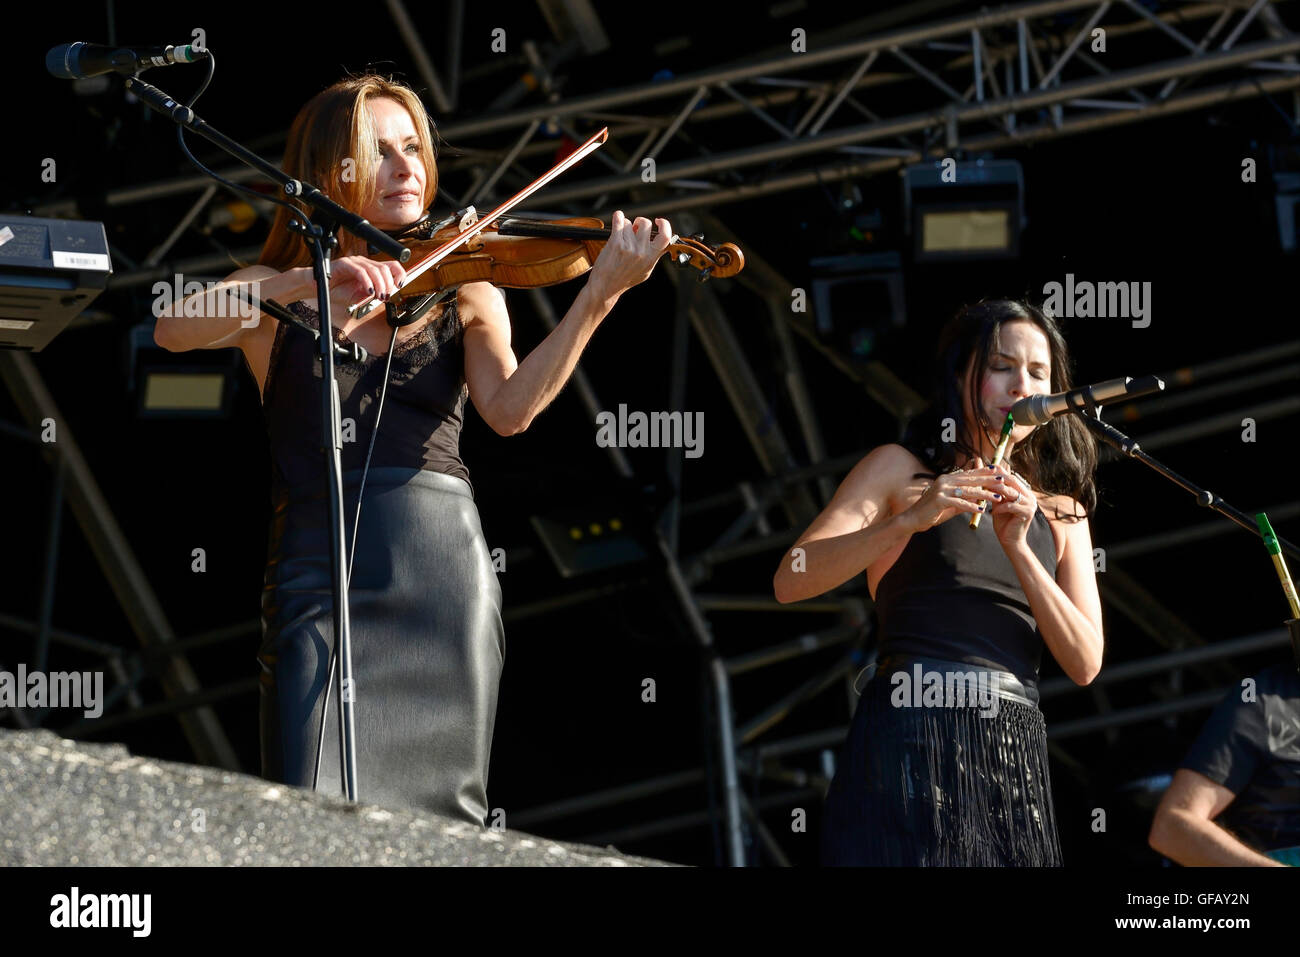 Carfest North, Bolesworth, Cheshire, UK. 30th July 2016. The Corrs performing on the main stage. The event is the brainchild of Chris Evans and features 3 days of cars, music and entertainment with profits being donated to the charity Children in Need. Andrew Paterson/Alamy Live News Stock Photo